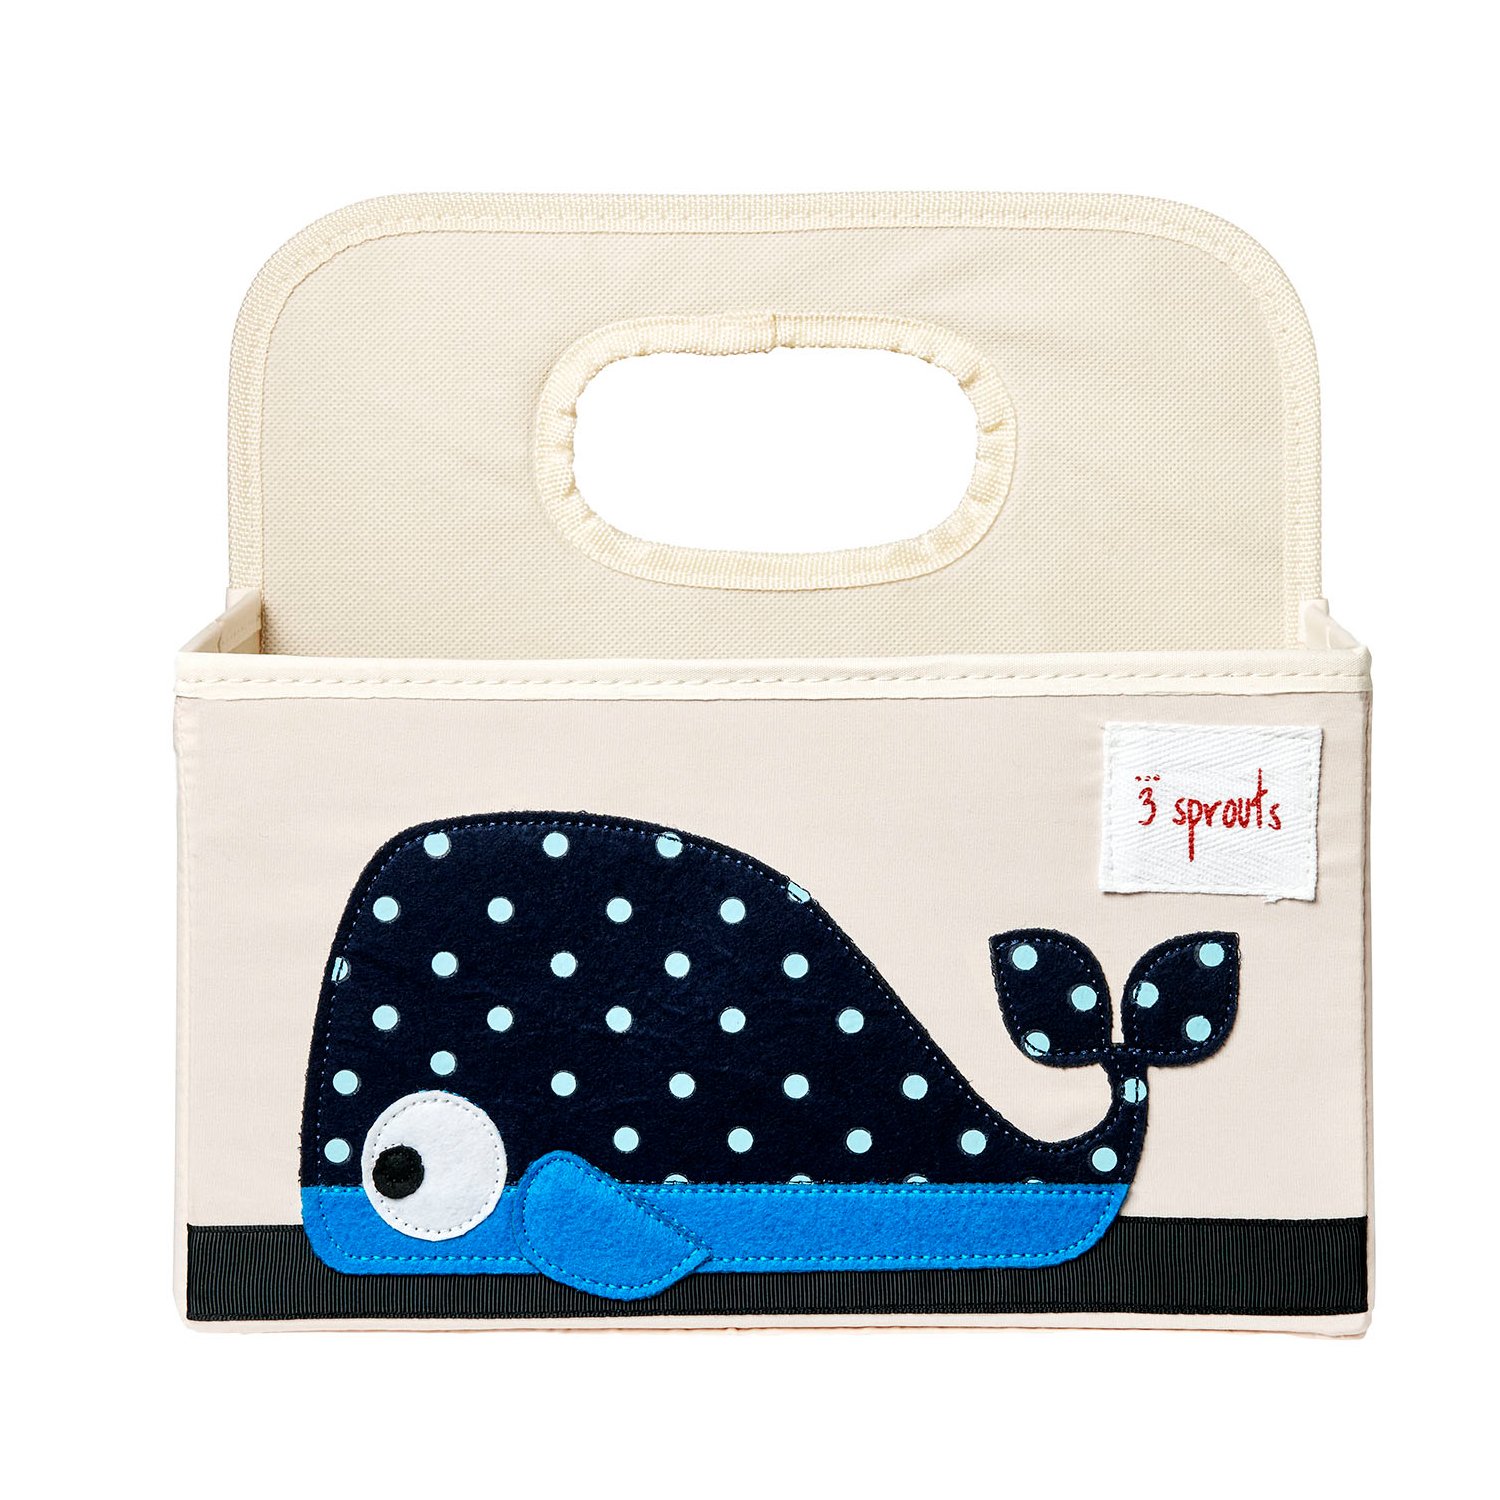 3Sprouts_Diaper_Caddy_Whale_1024x1024@2x